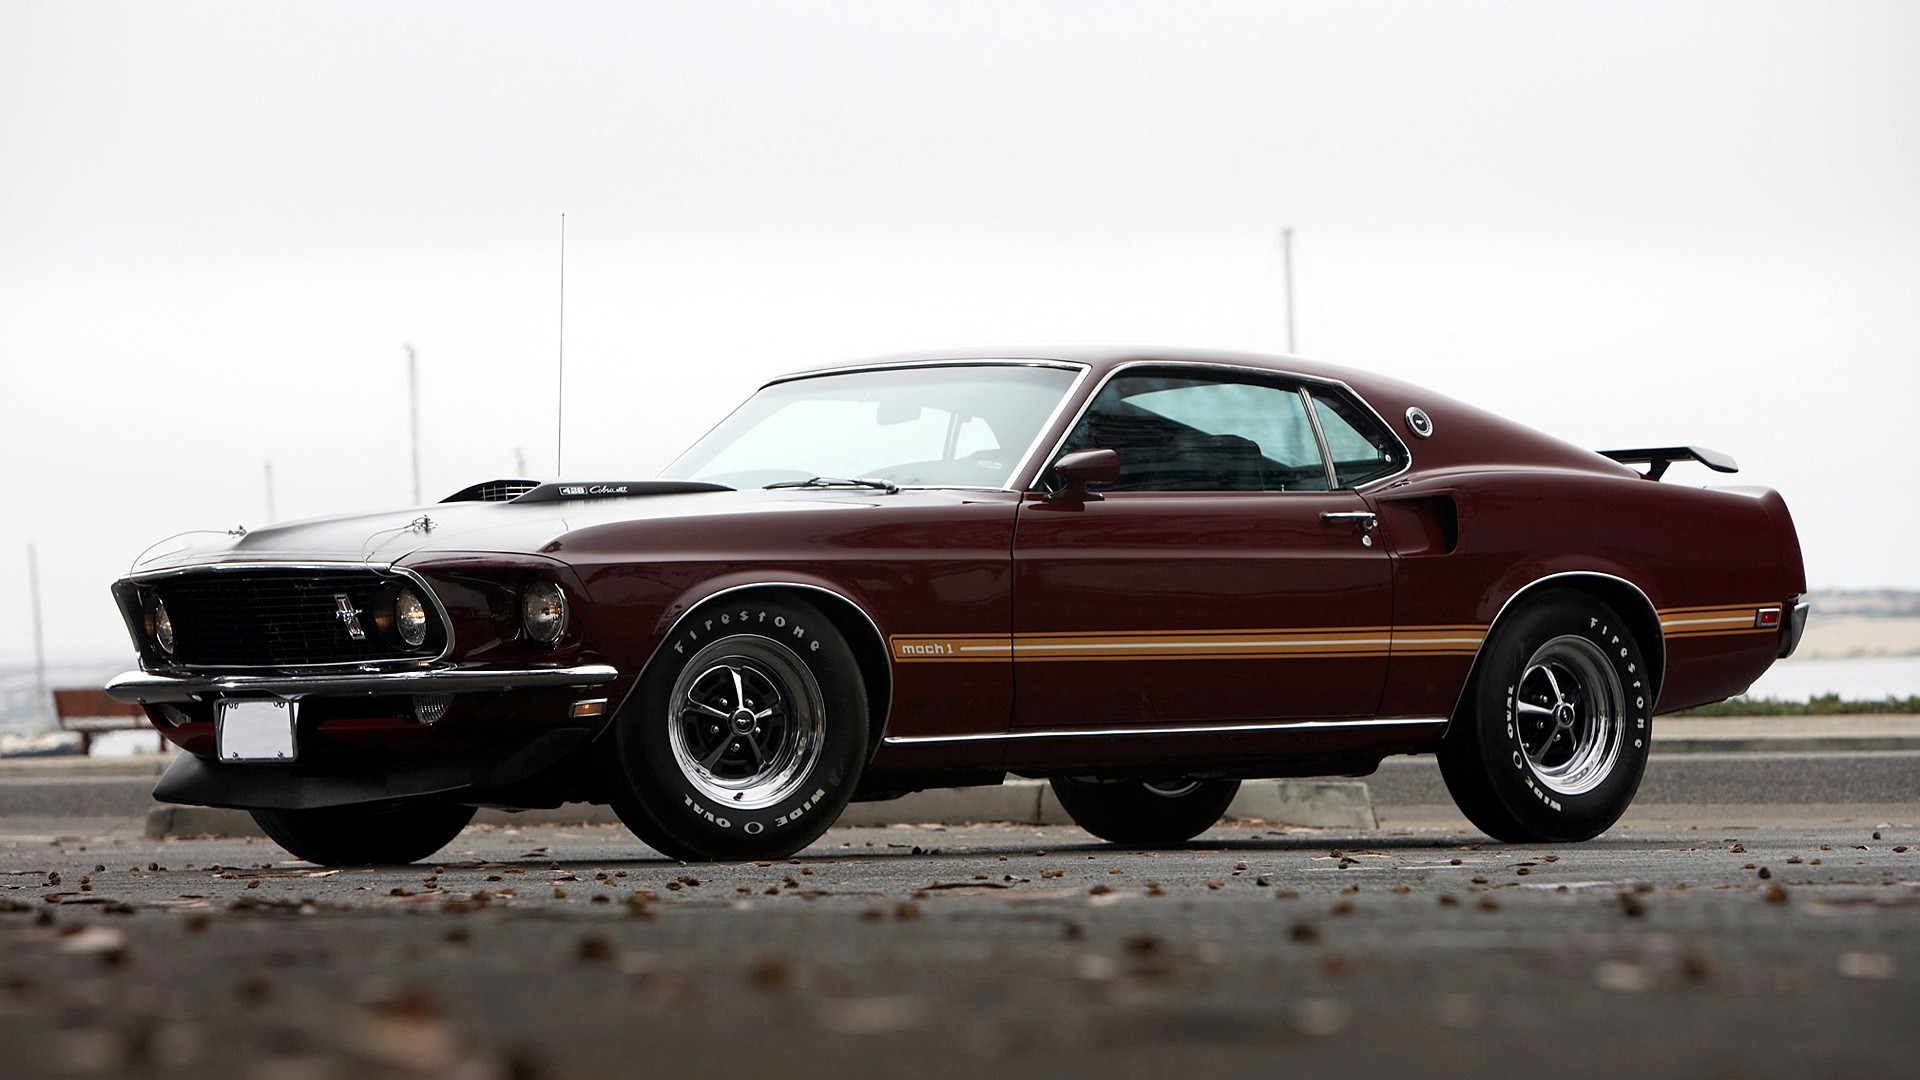 1920x1080 Wallpaper Cars. old muscle cars mustang